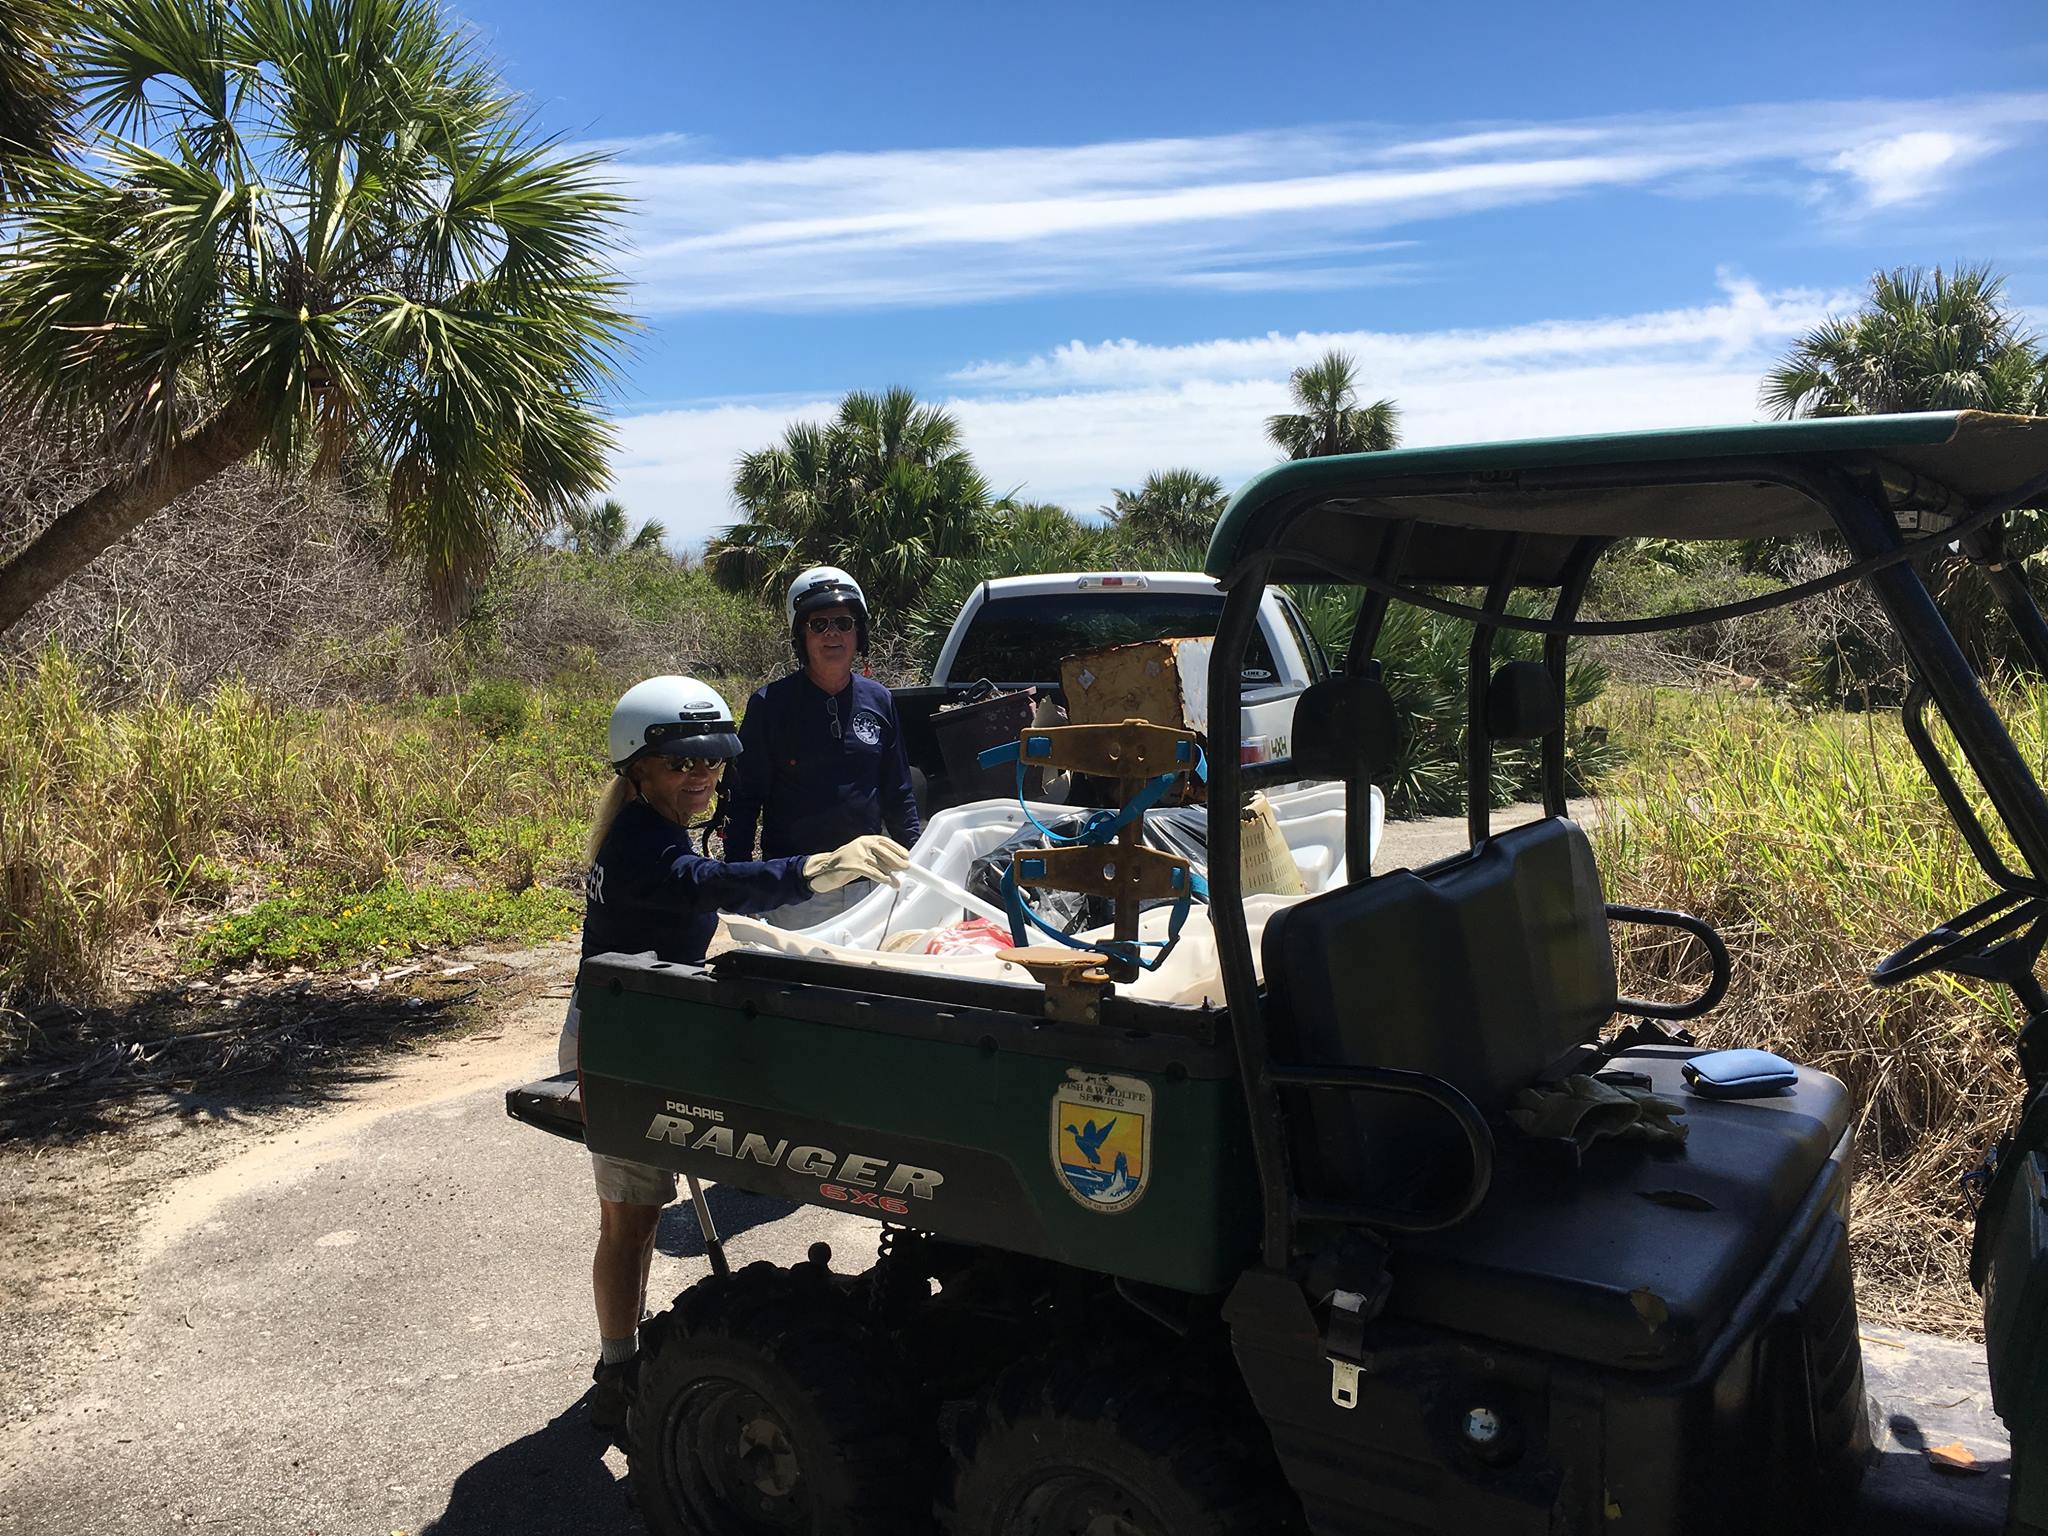 An image of volunteers collecting litter and placing it in an OHV.